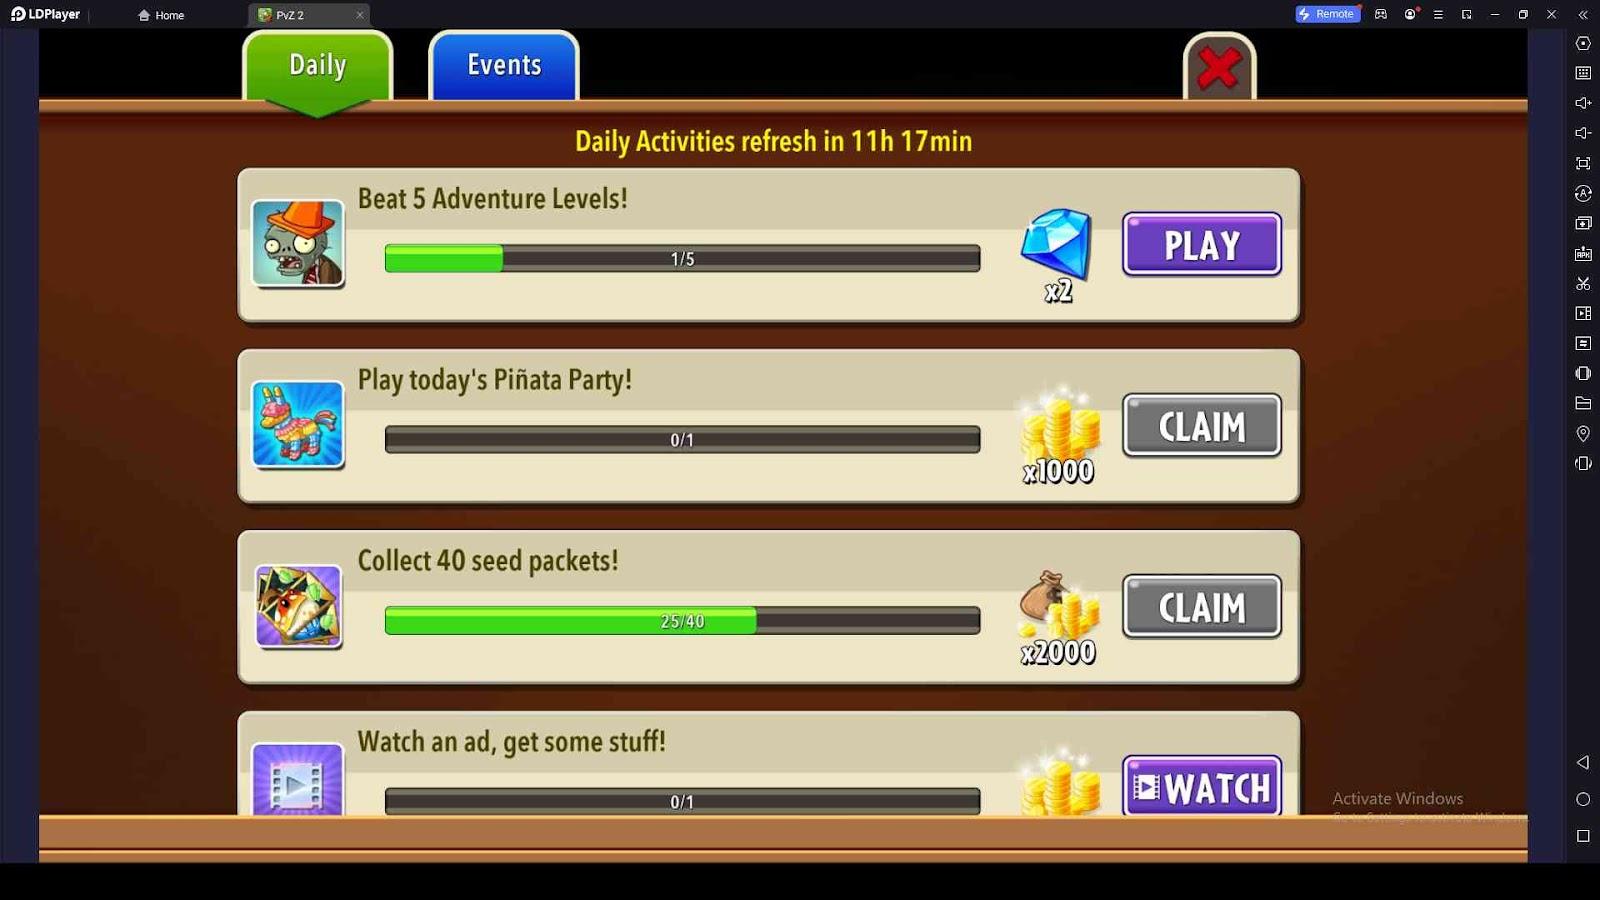 Complete Daily and Event Tasks in Plants vs Zombies 2